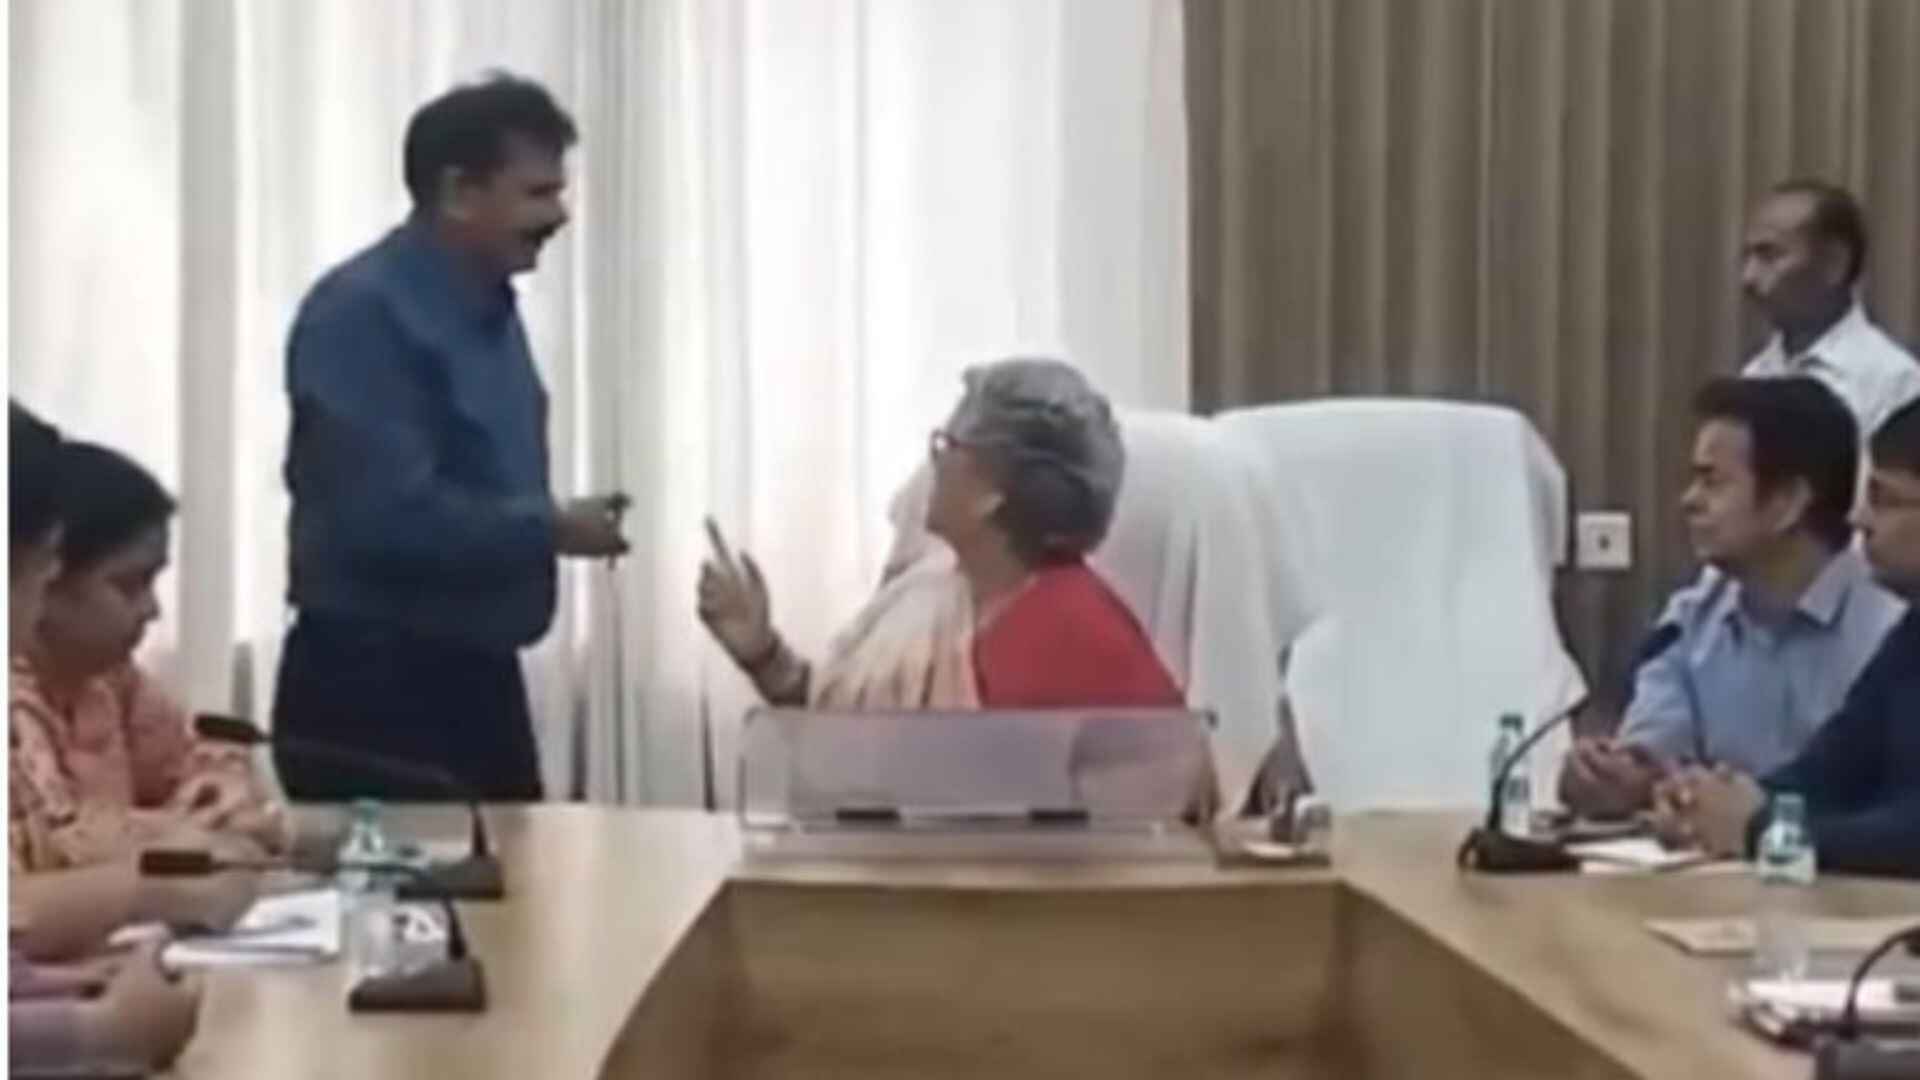 Kanpur mayor Pramila Pandey scolds a civic official